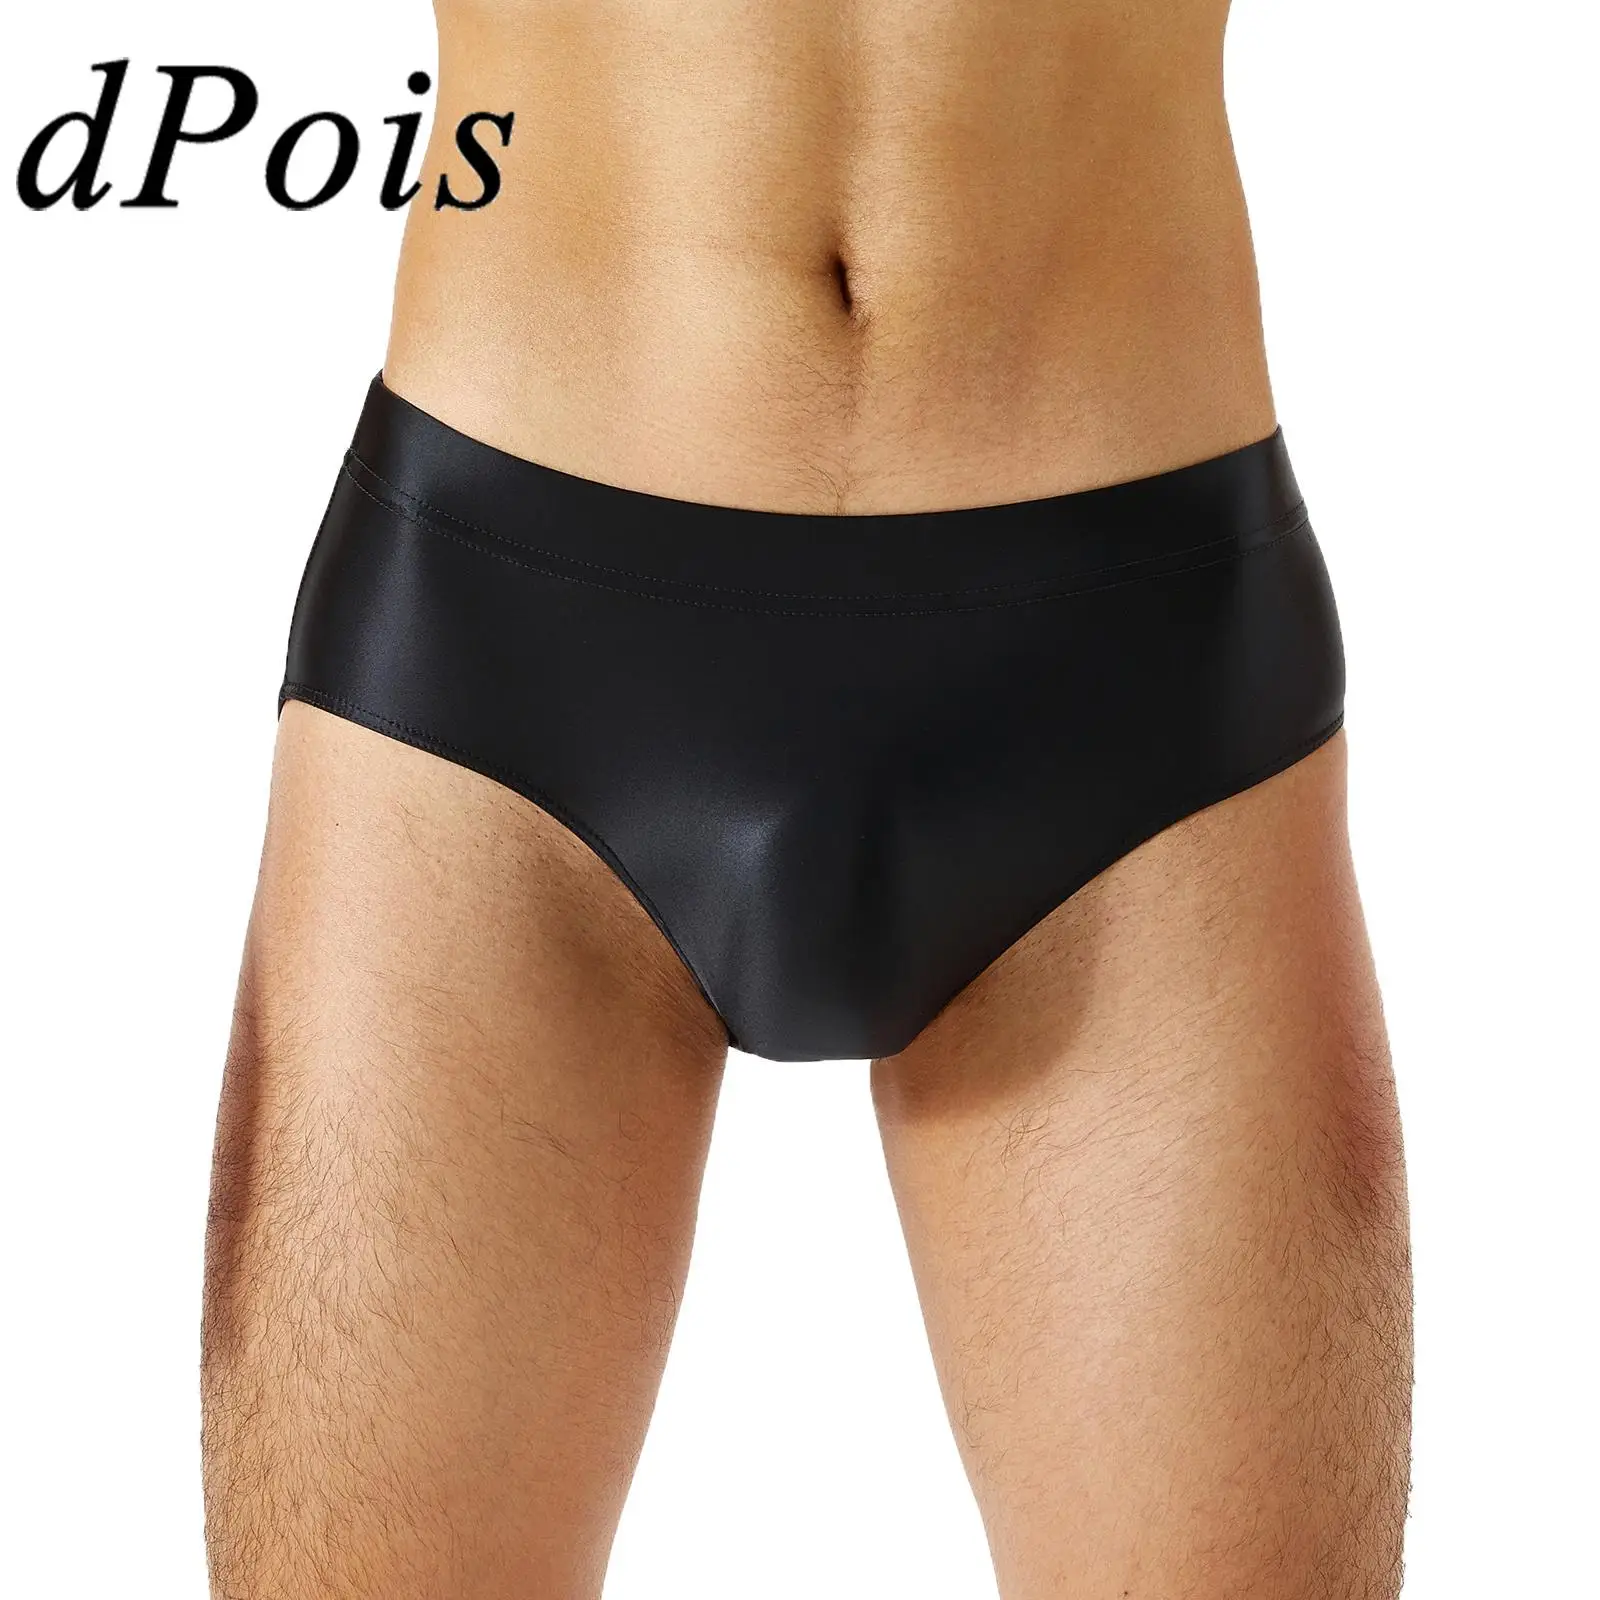 

Men's Oil Smooth Low Rise Briefs Glossy Lingerie Males Solid Color Elastic Waistband Panties Underpants Underwear Swimwear